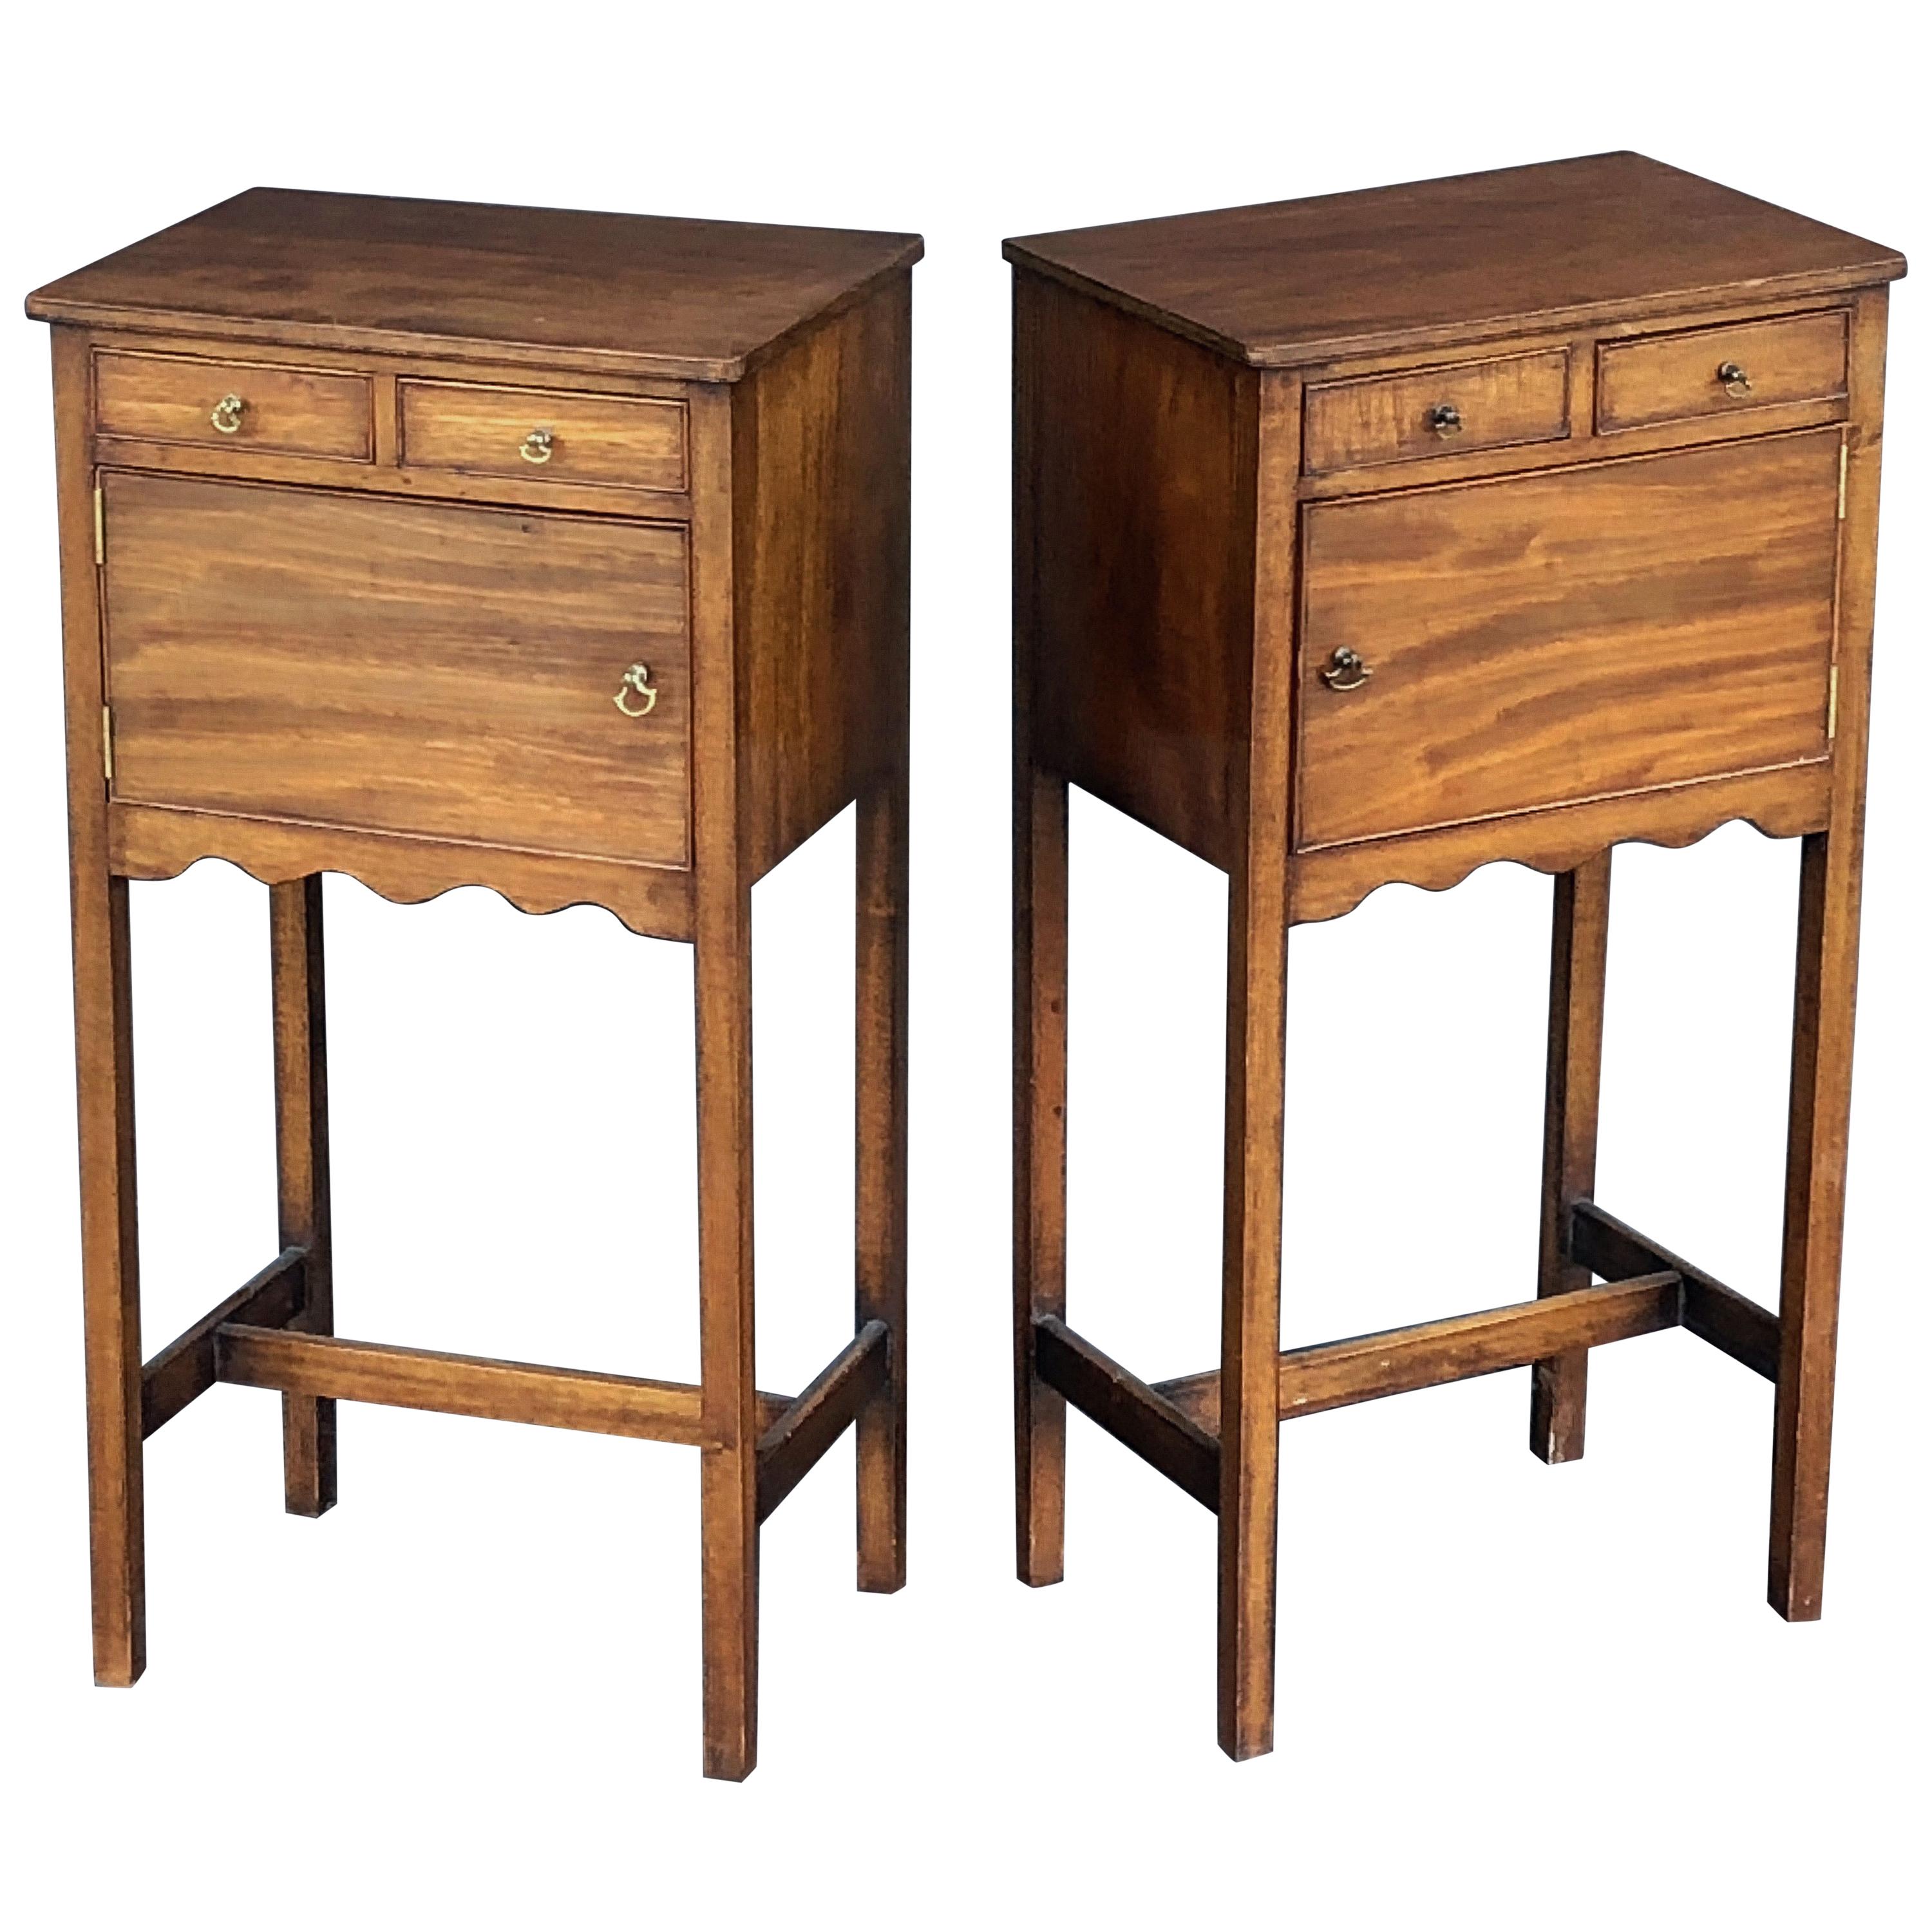 English Georgian Style Nightstands or Bedside Cabinets  'Priced as Pair'